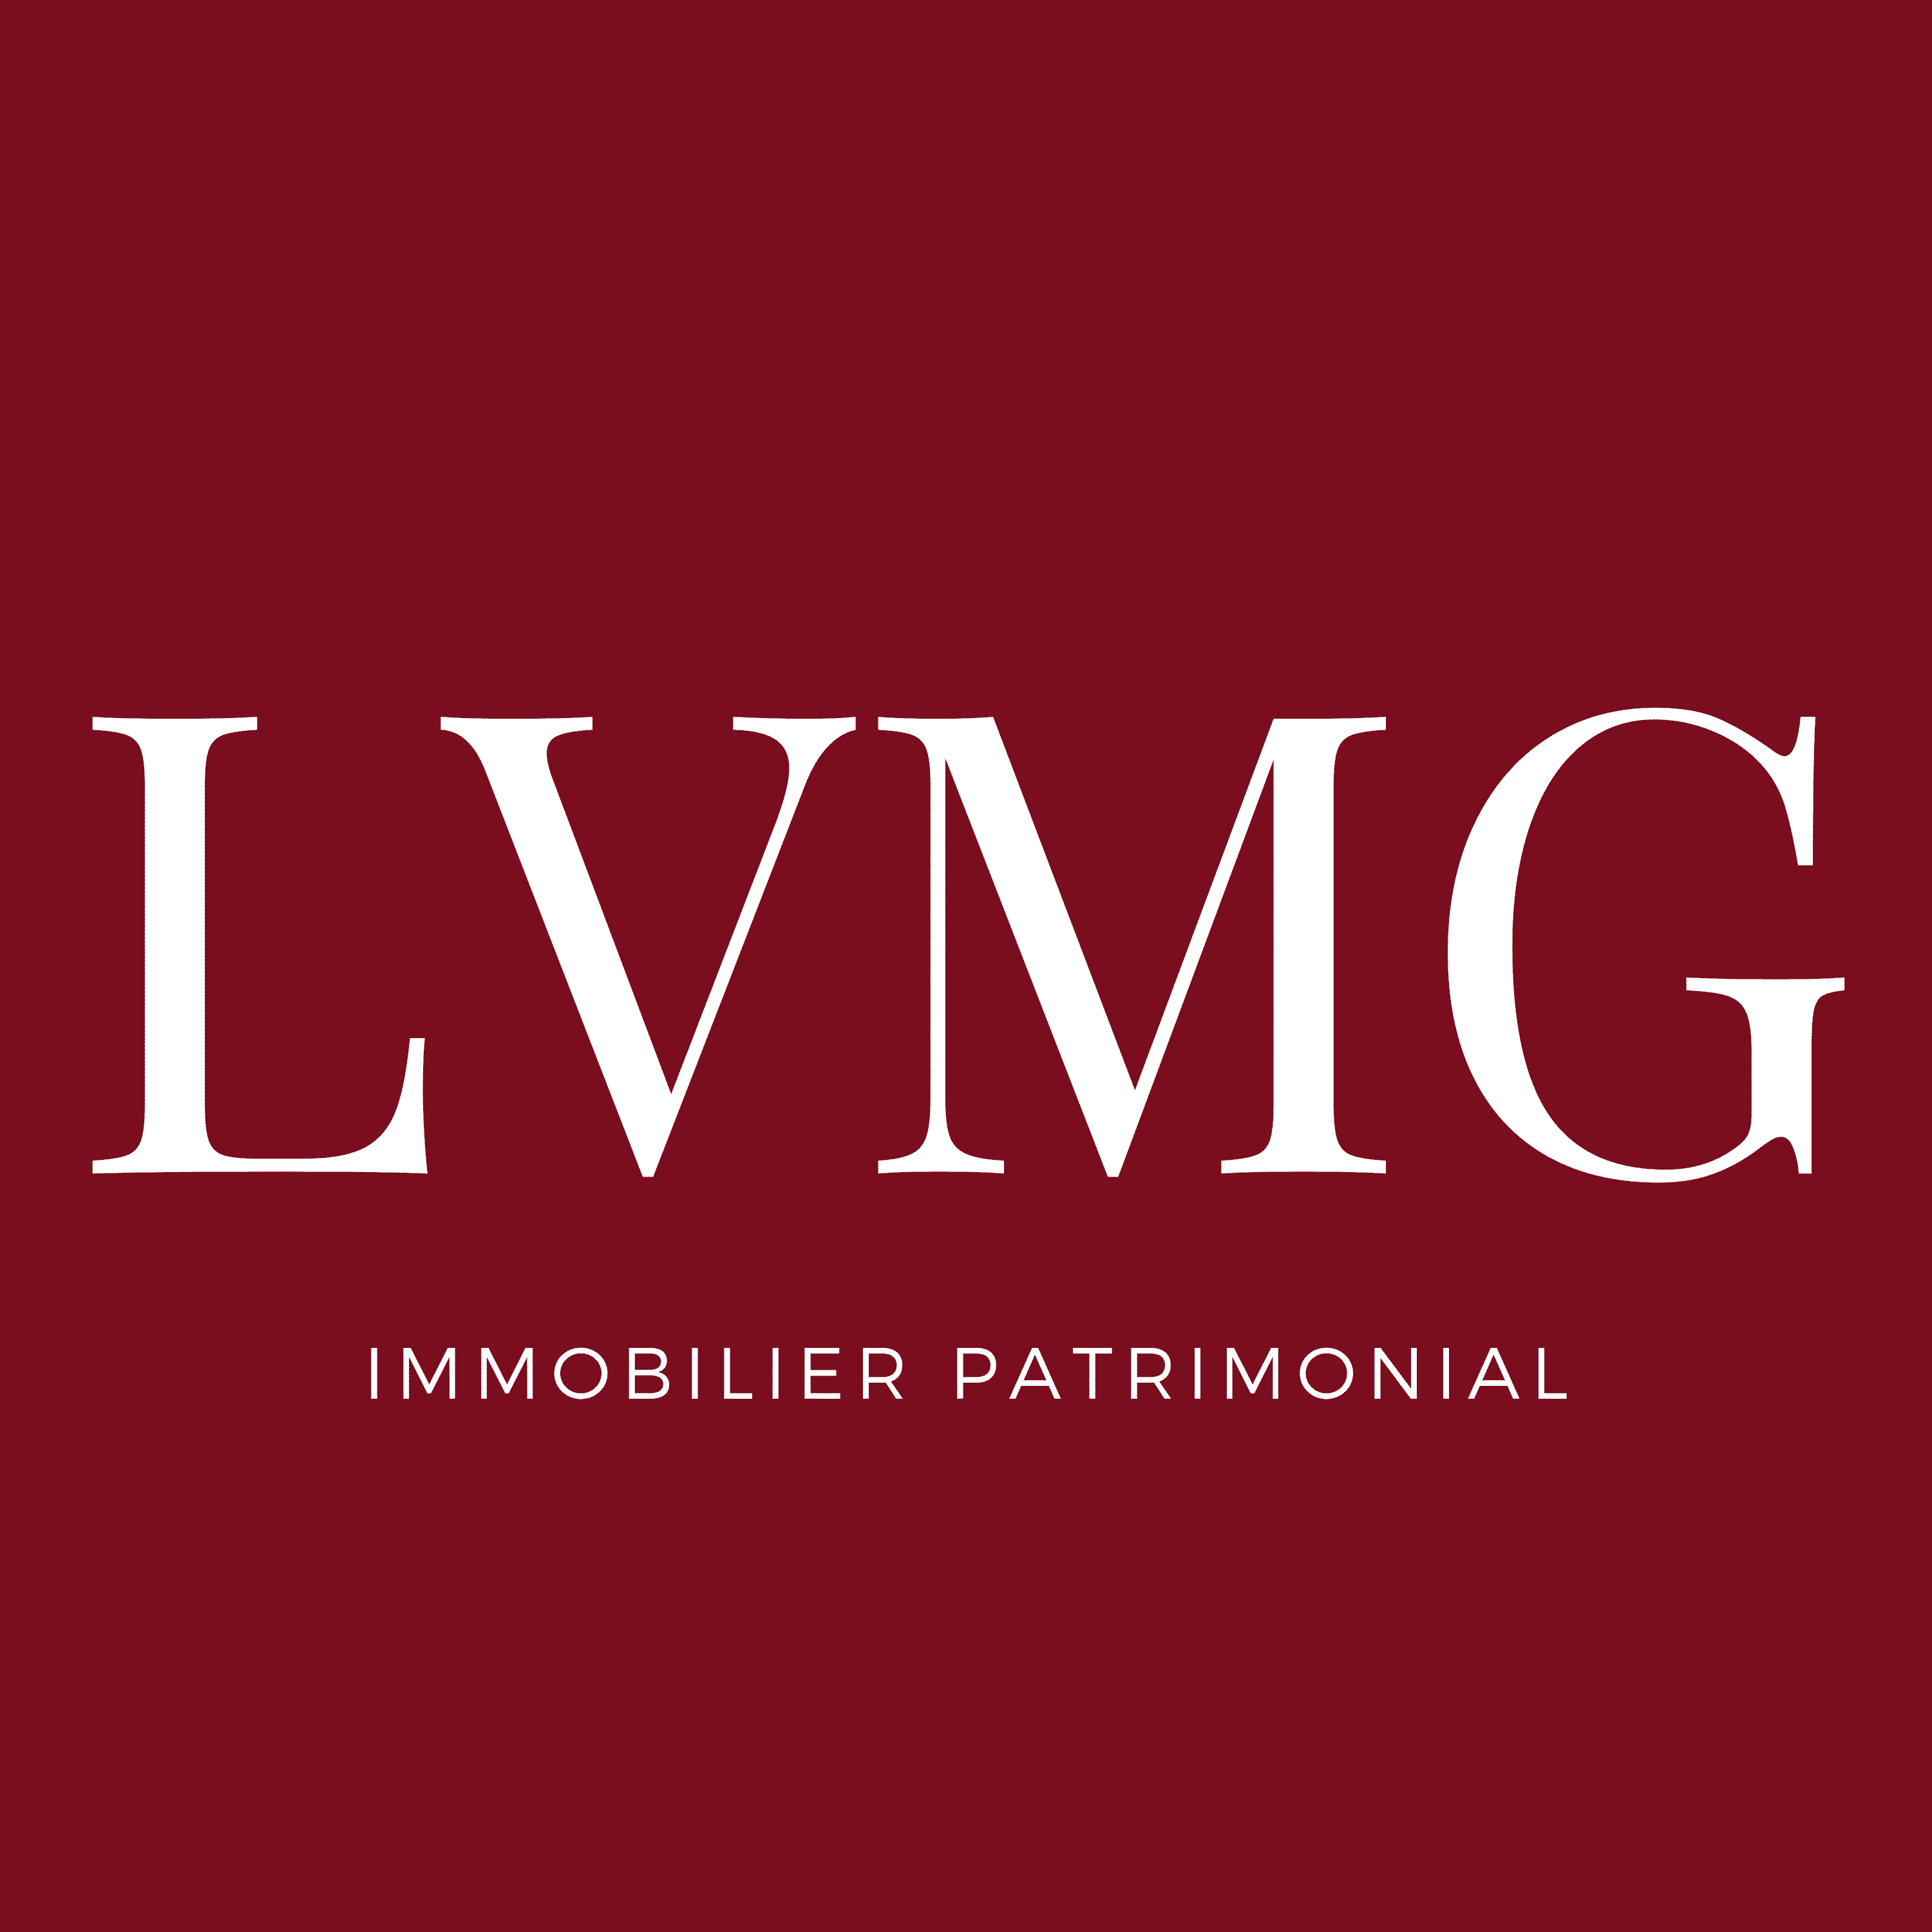 LVMG - High quality small cap real estates companies